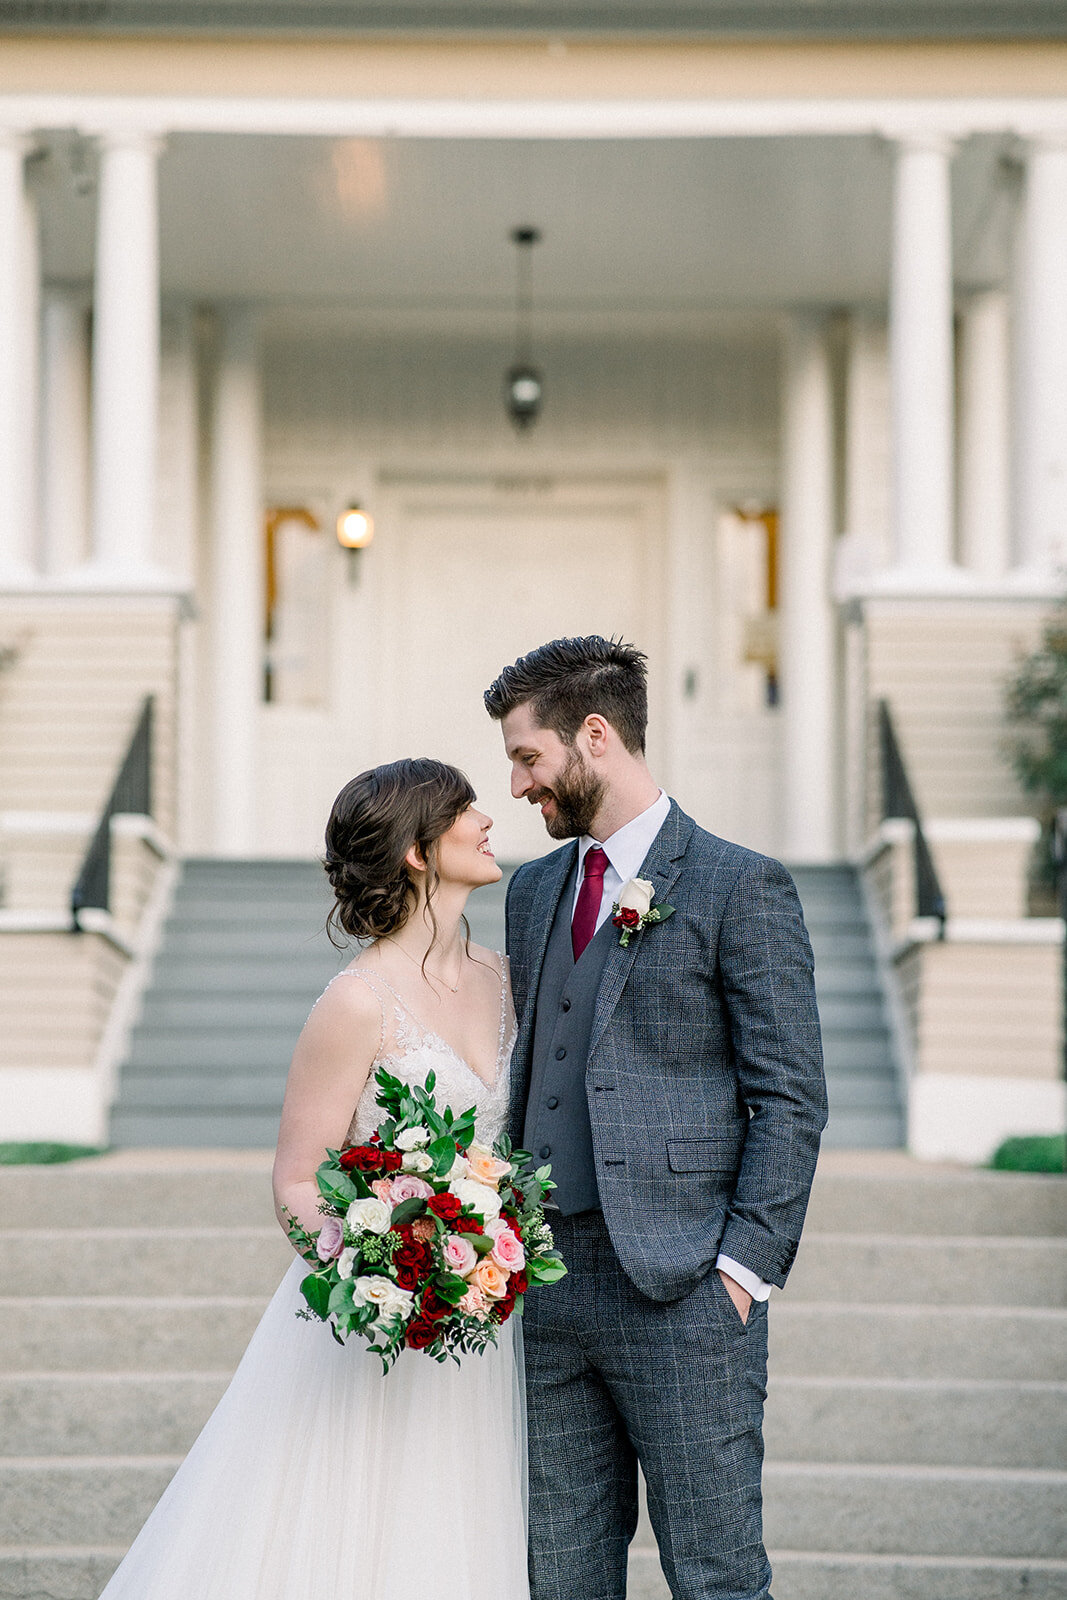 This elegant photo by Tiffany Longeway captures a beautiful wedding moment in Sacramento, showcasing the couple's love and joy amidst the city's blend of modern and historical settings.